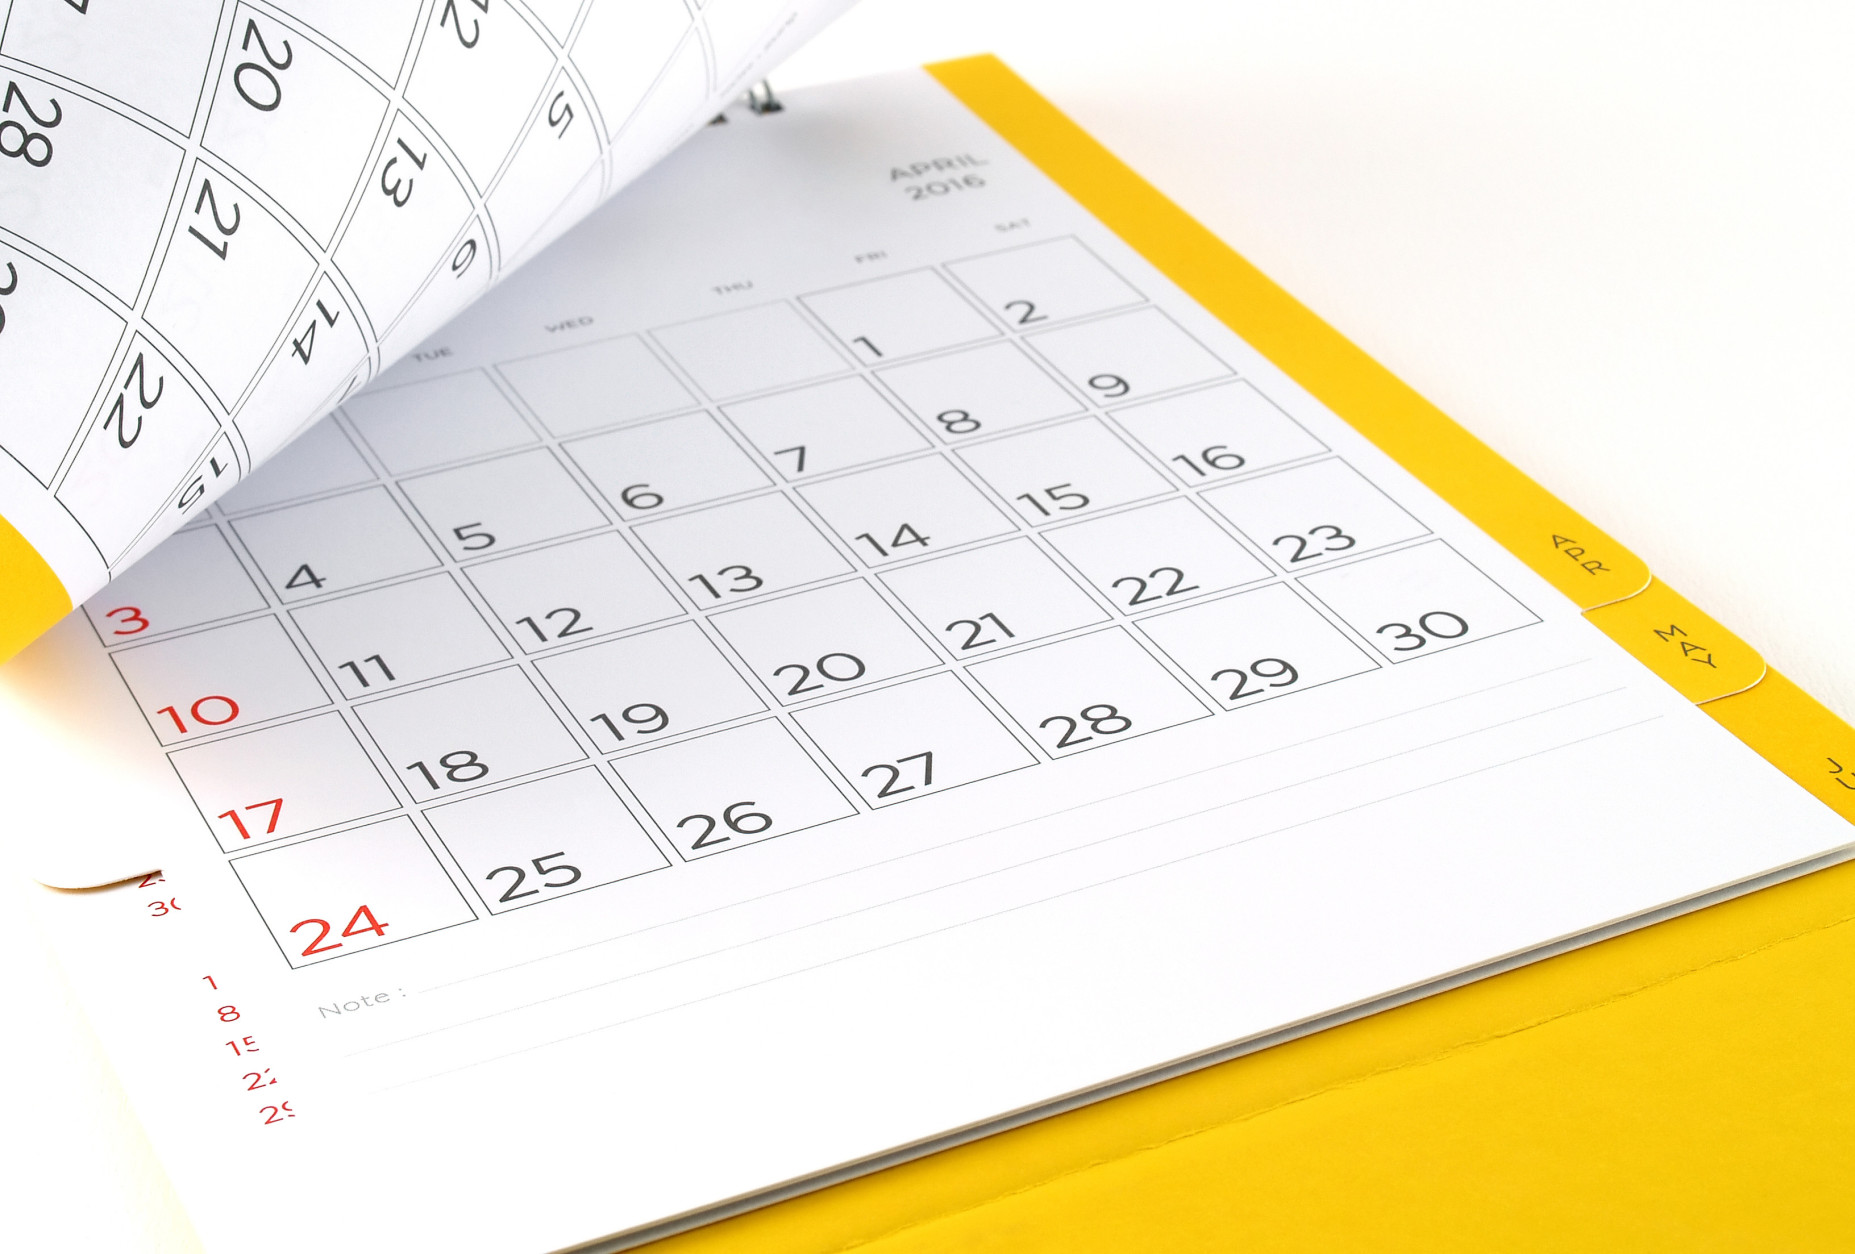 desk calendar with days and dates in April 2016 and blank lines for notes, flip the calendar page